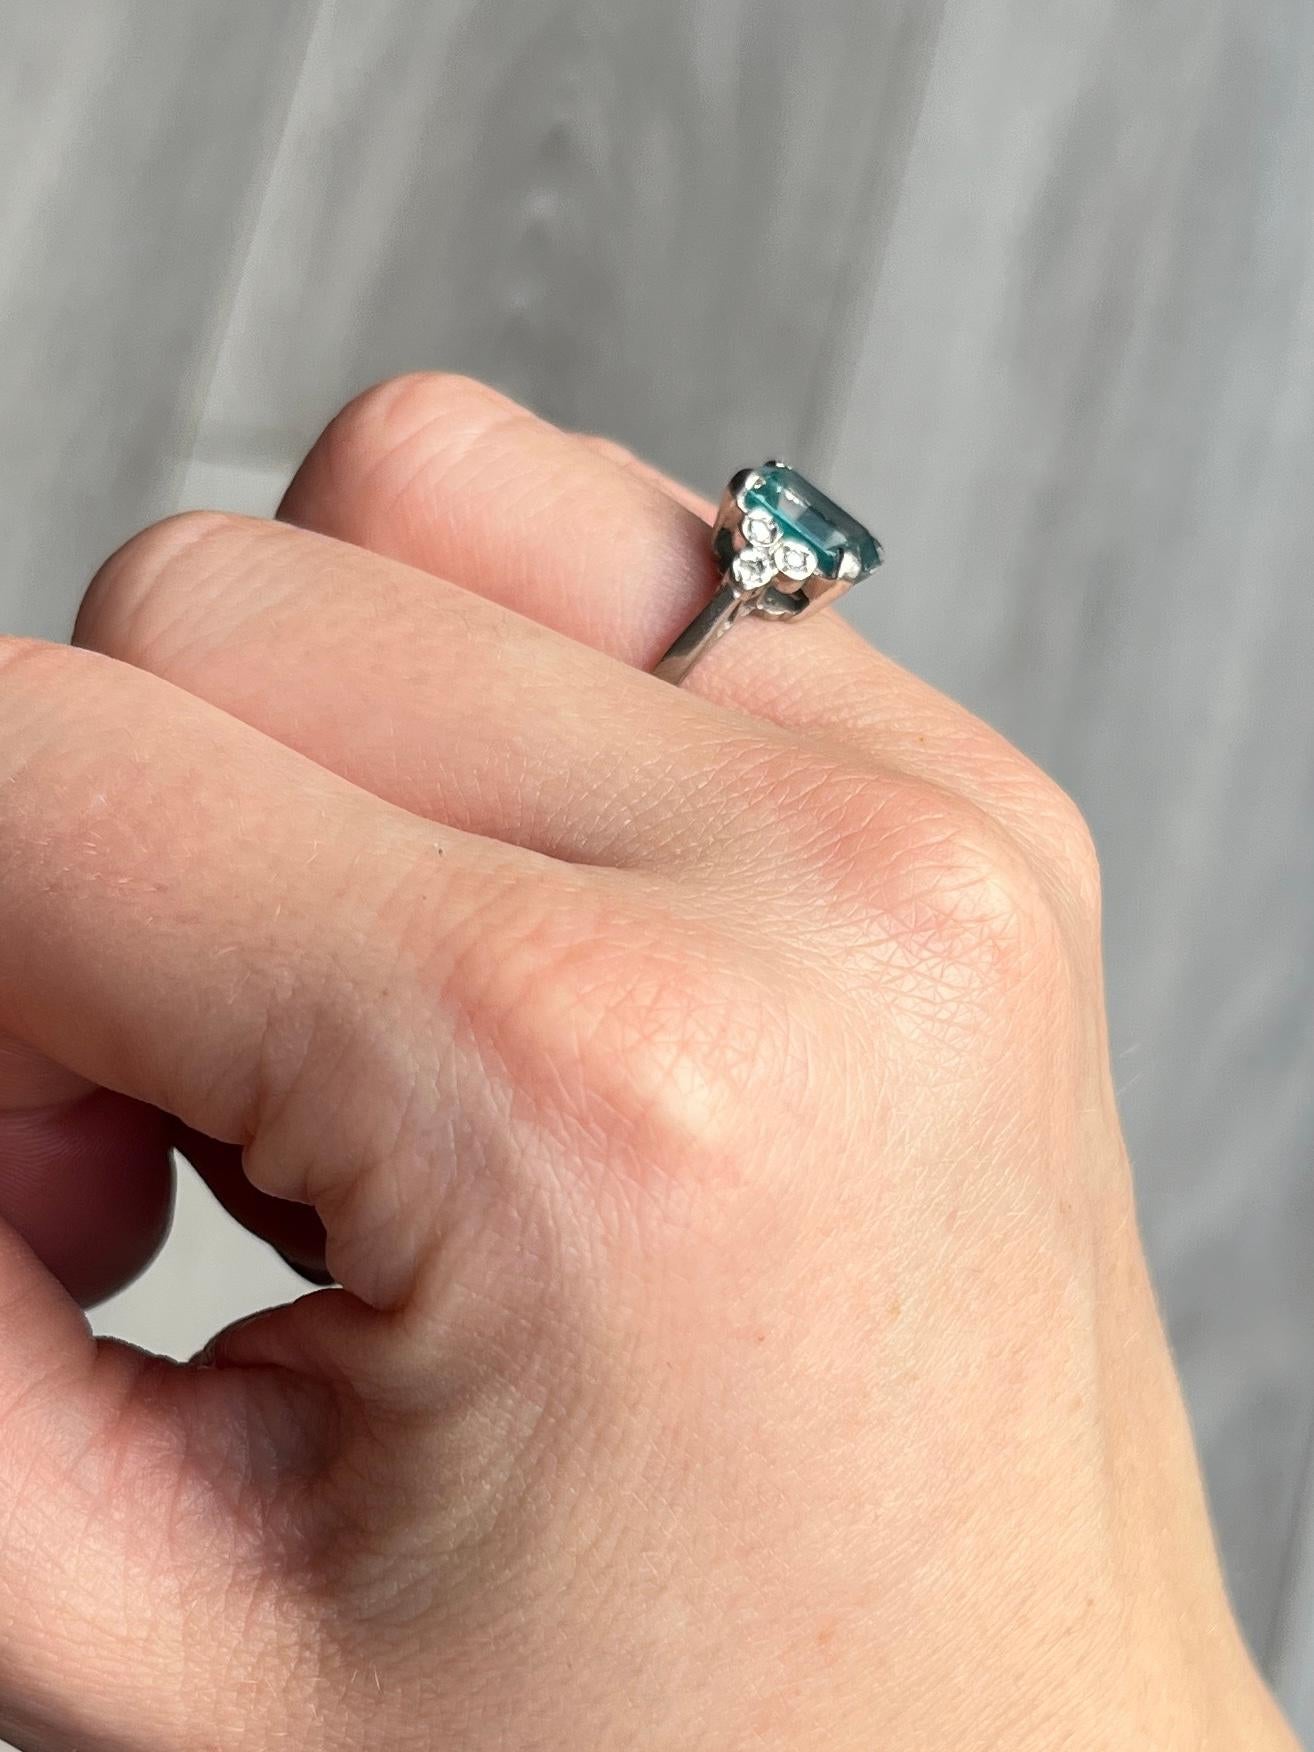 Striking blue topaz set simply in 9 carat white gold and sat either side is a  trio of diamonds. Topaz measures 1.5carat and the diamond total is 12pts. Fully hallmarked London 1975.

Ring Size: J or 4 3/4
Topaz Dimensions: 10x7.5mm
Height Off